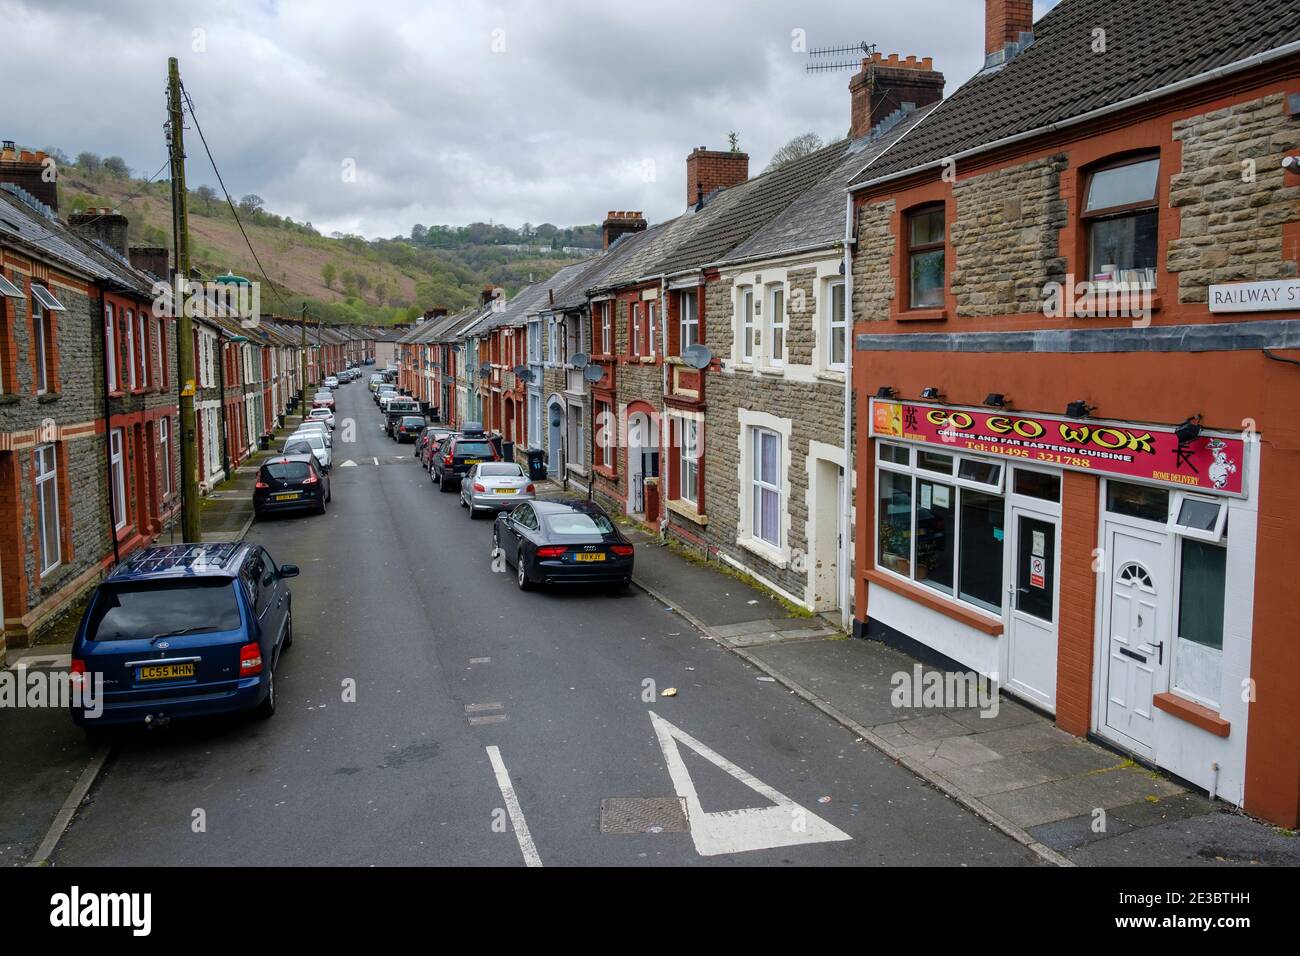 A terraced street typical of the former mining communities in the Welsh Valleys - Railway Street, Llanhilleth Stock Photo